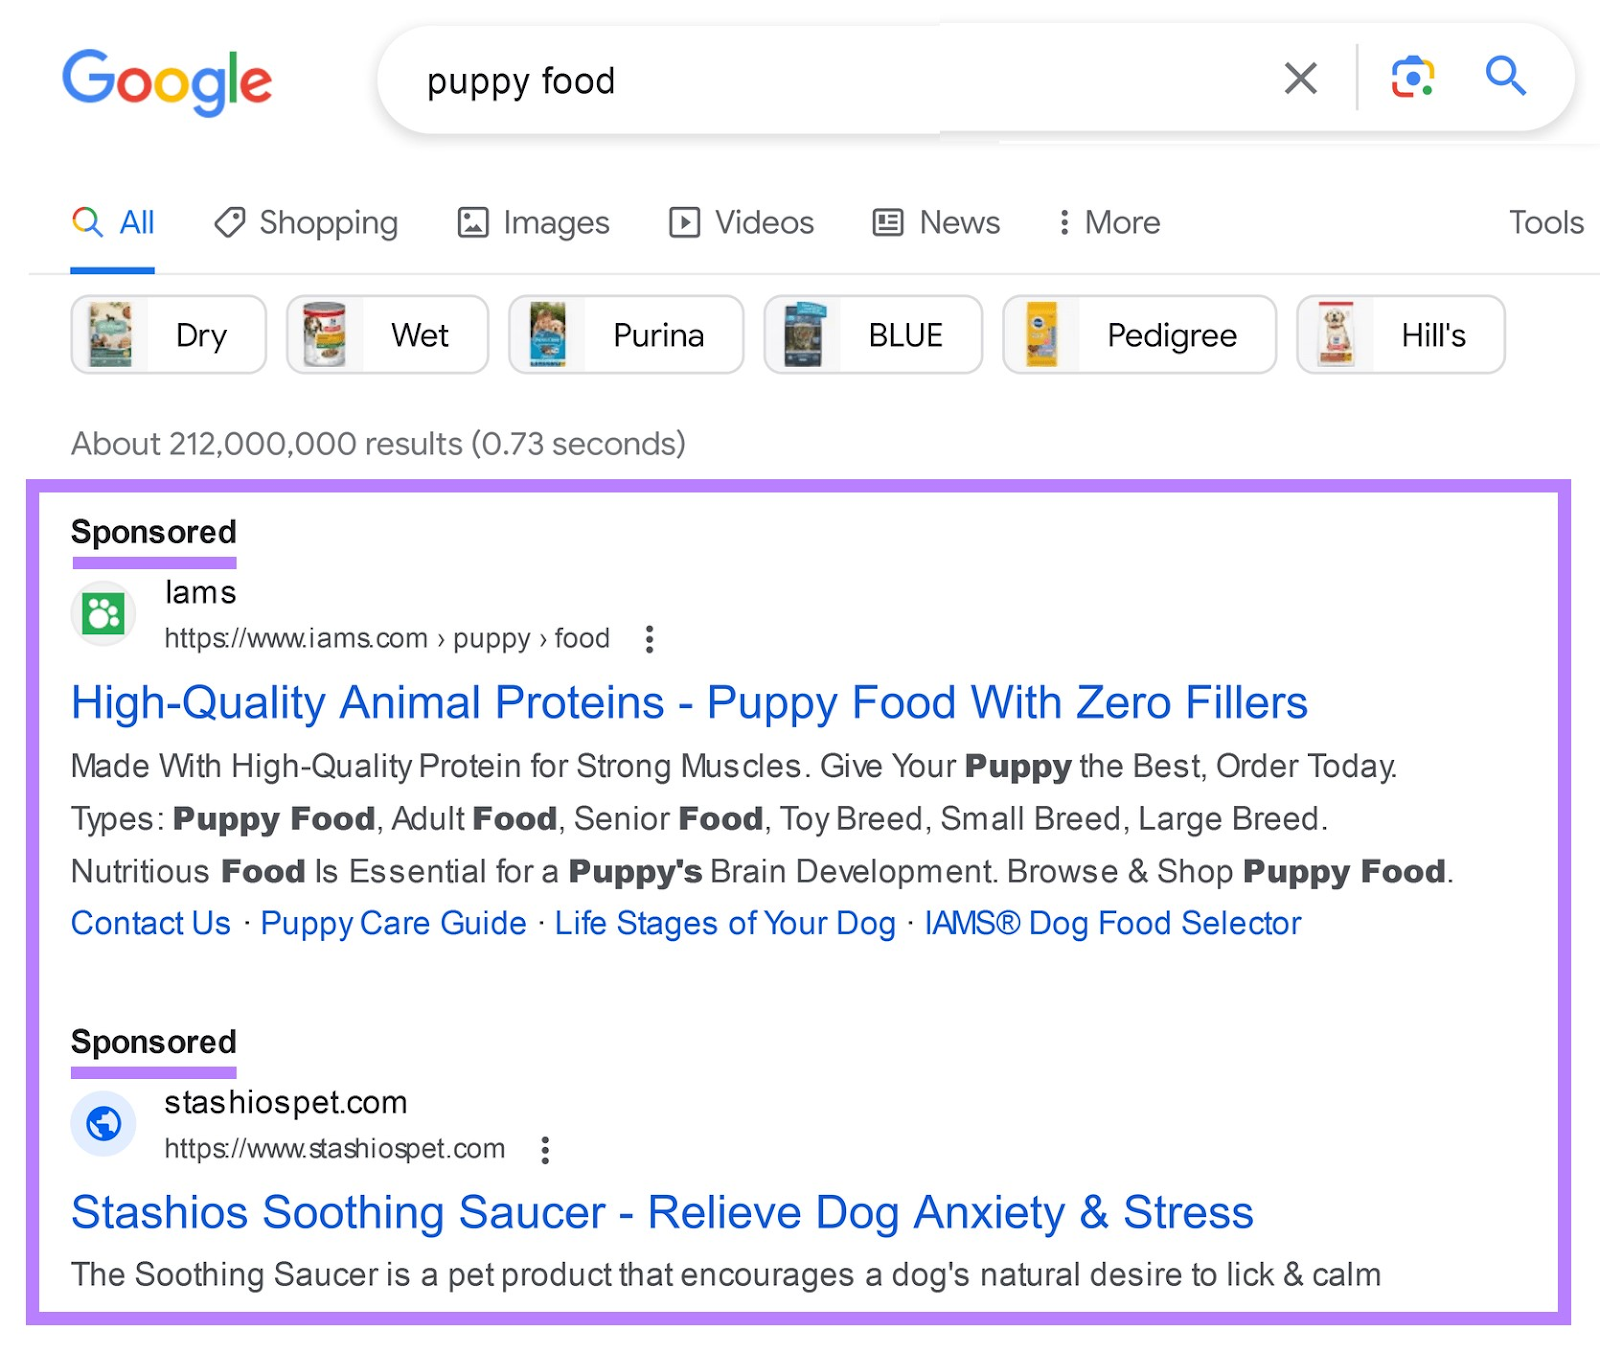 PPC ads in Google SERP for "puppy food"